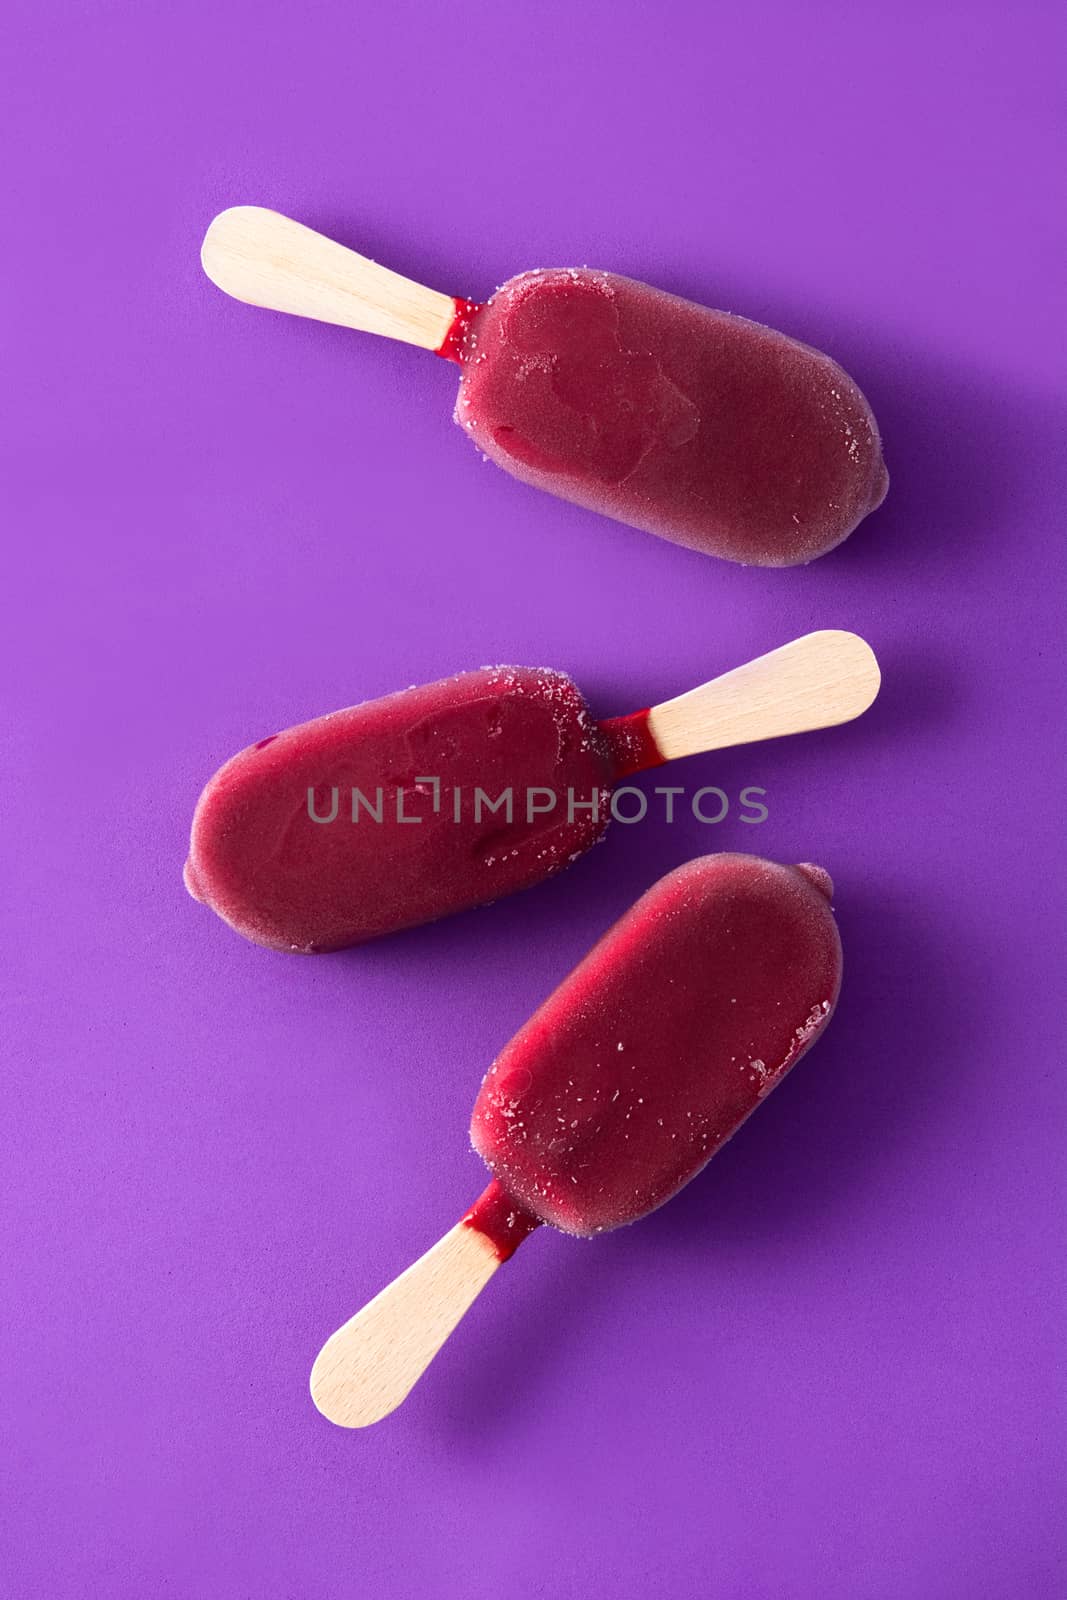 Strawberry popsicle on violet background.